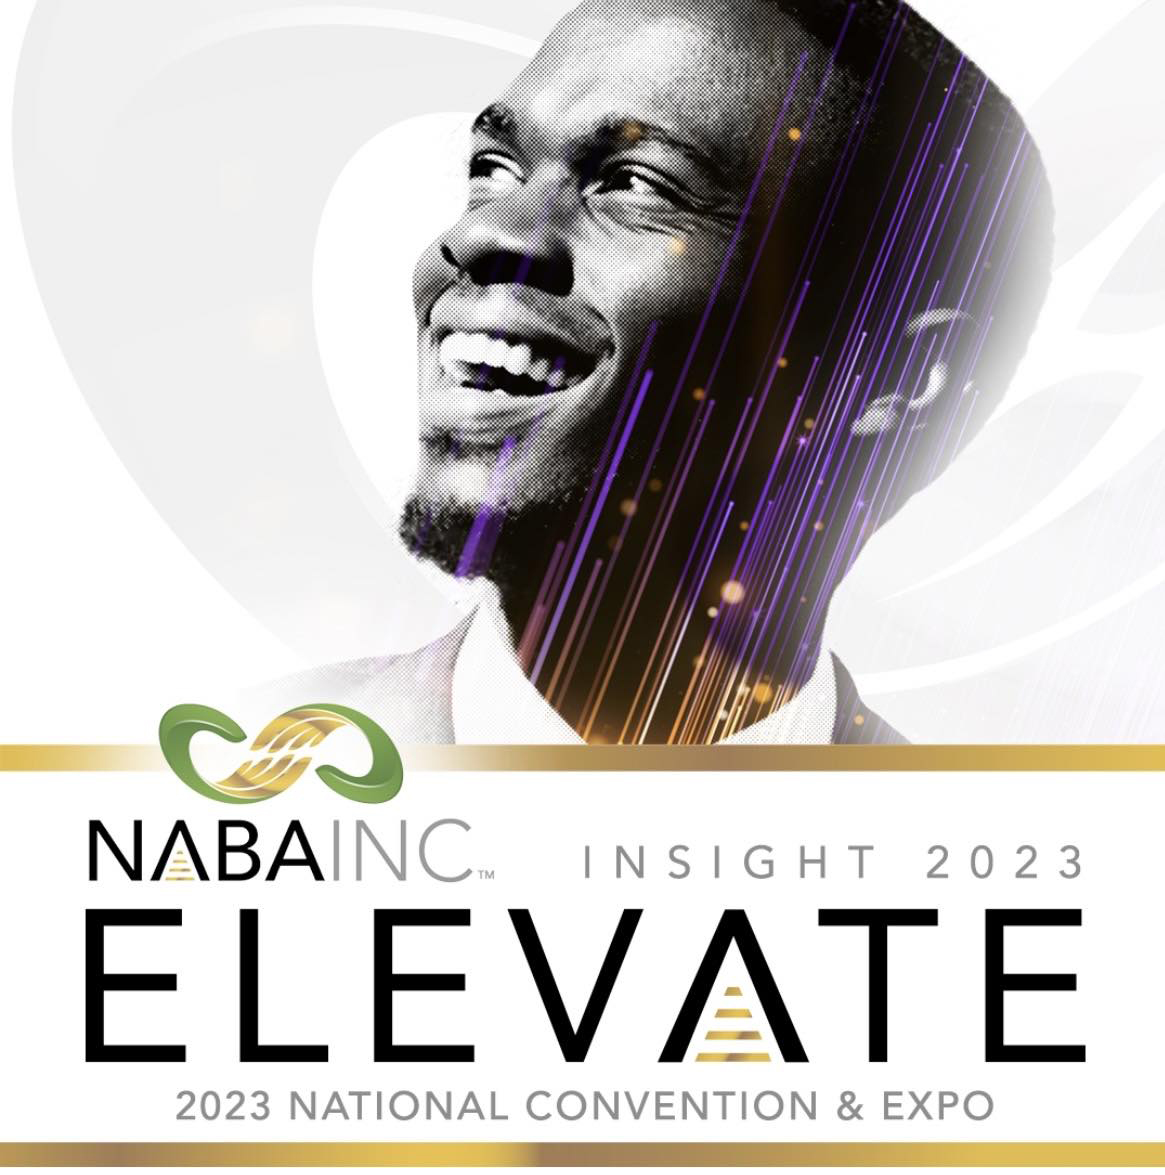 Reynolds students attend NABA Convention